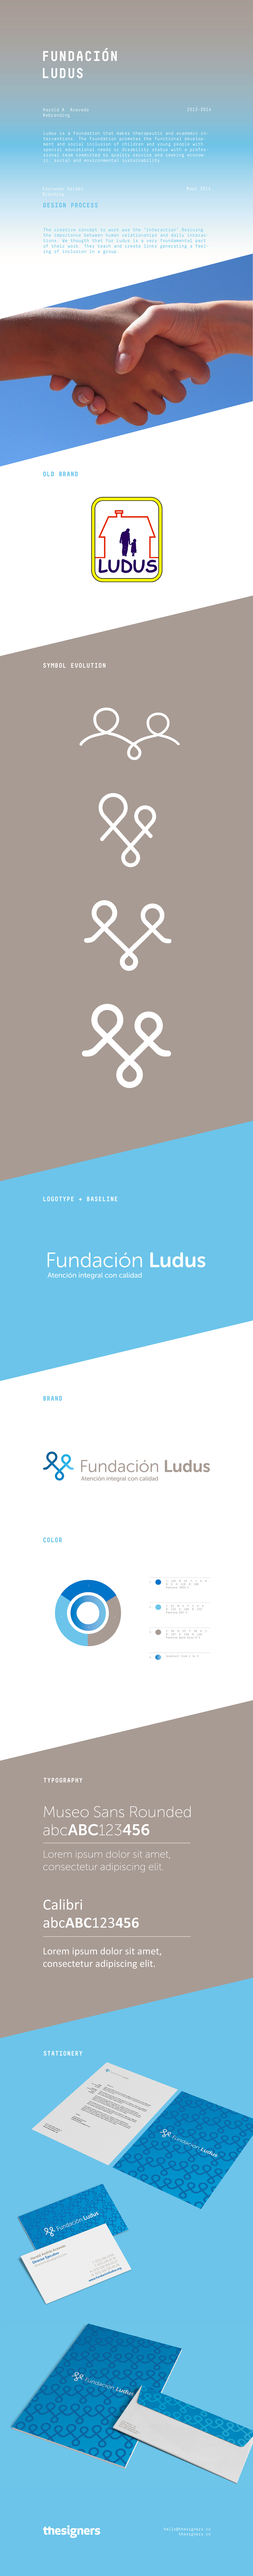 Fundación Ludus foundation children people Education Young Relationships interaction